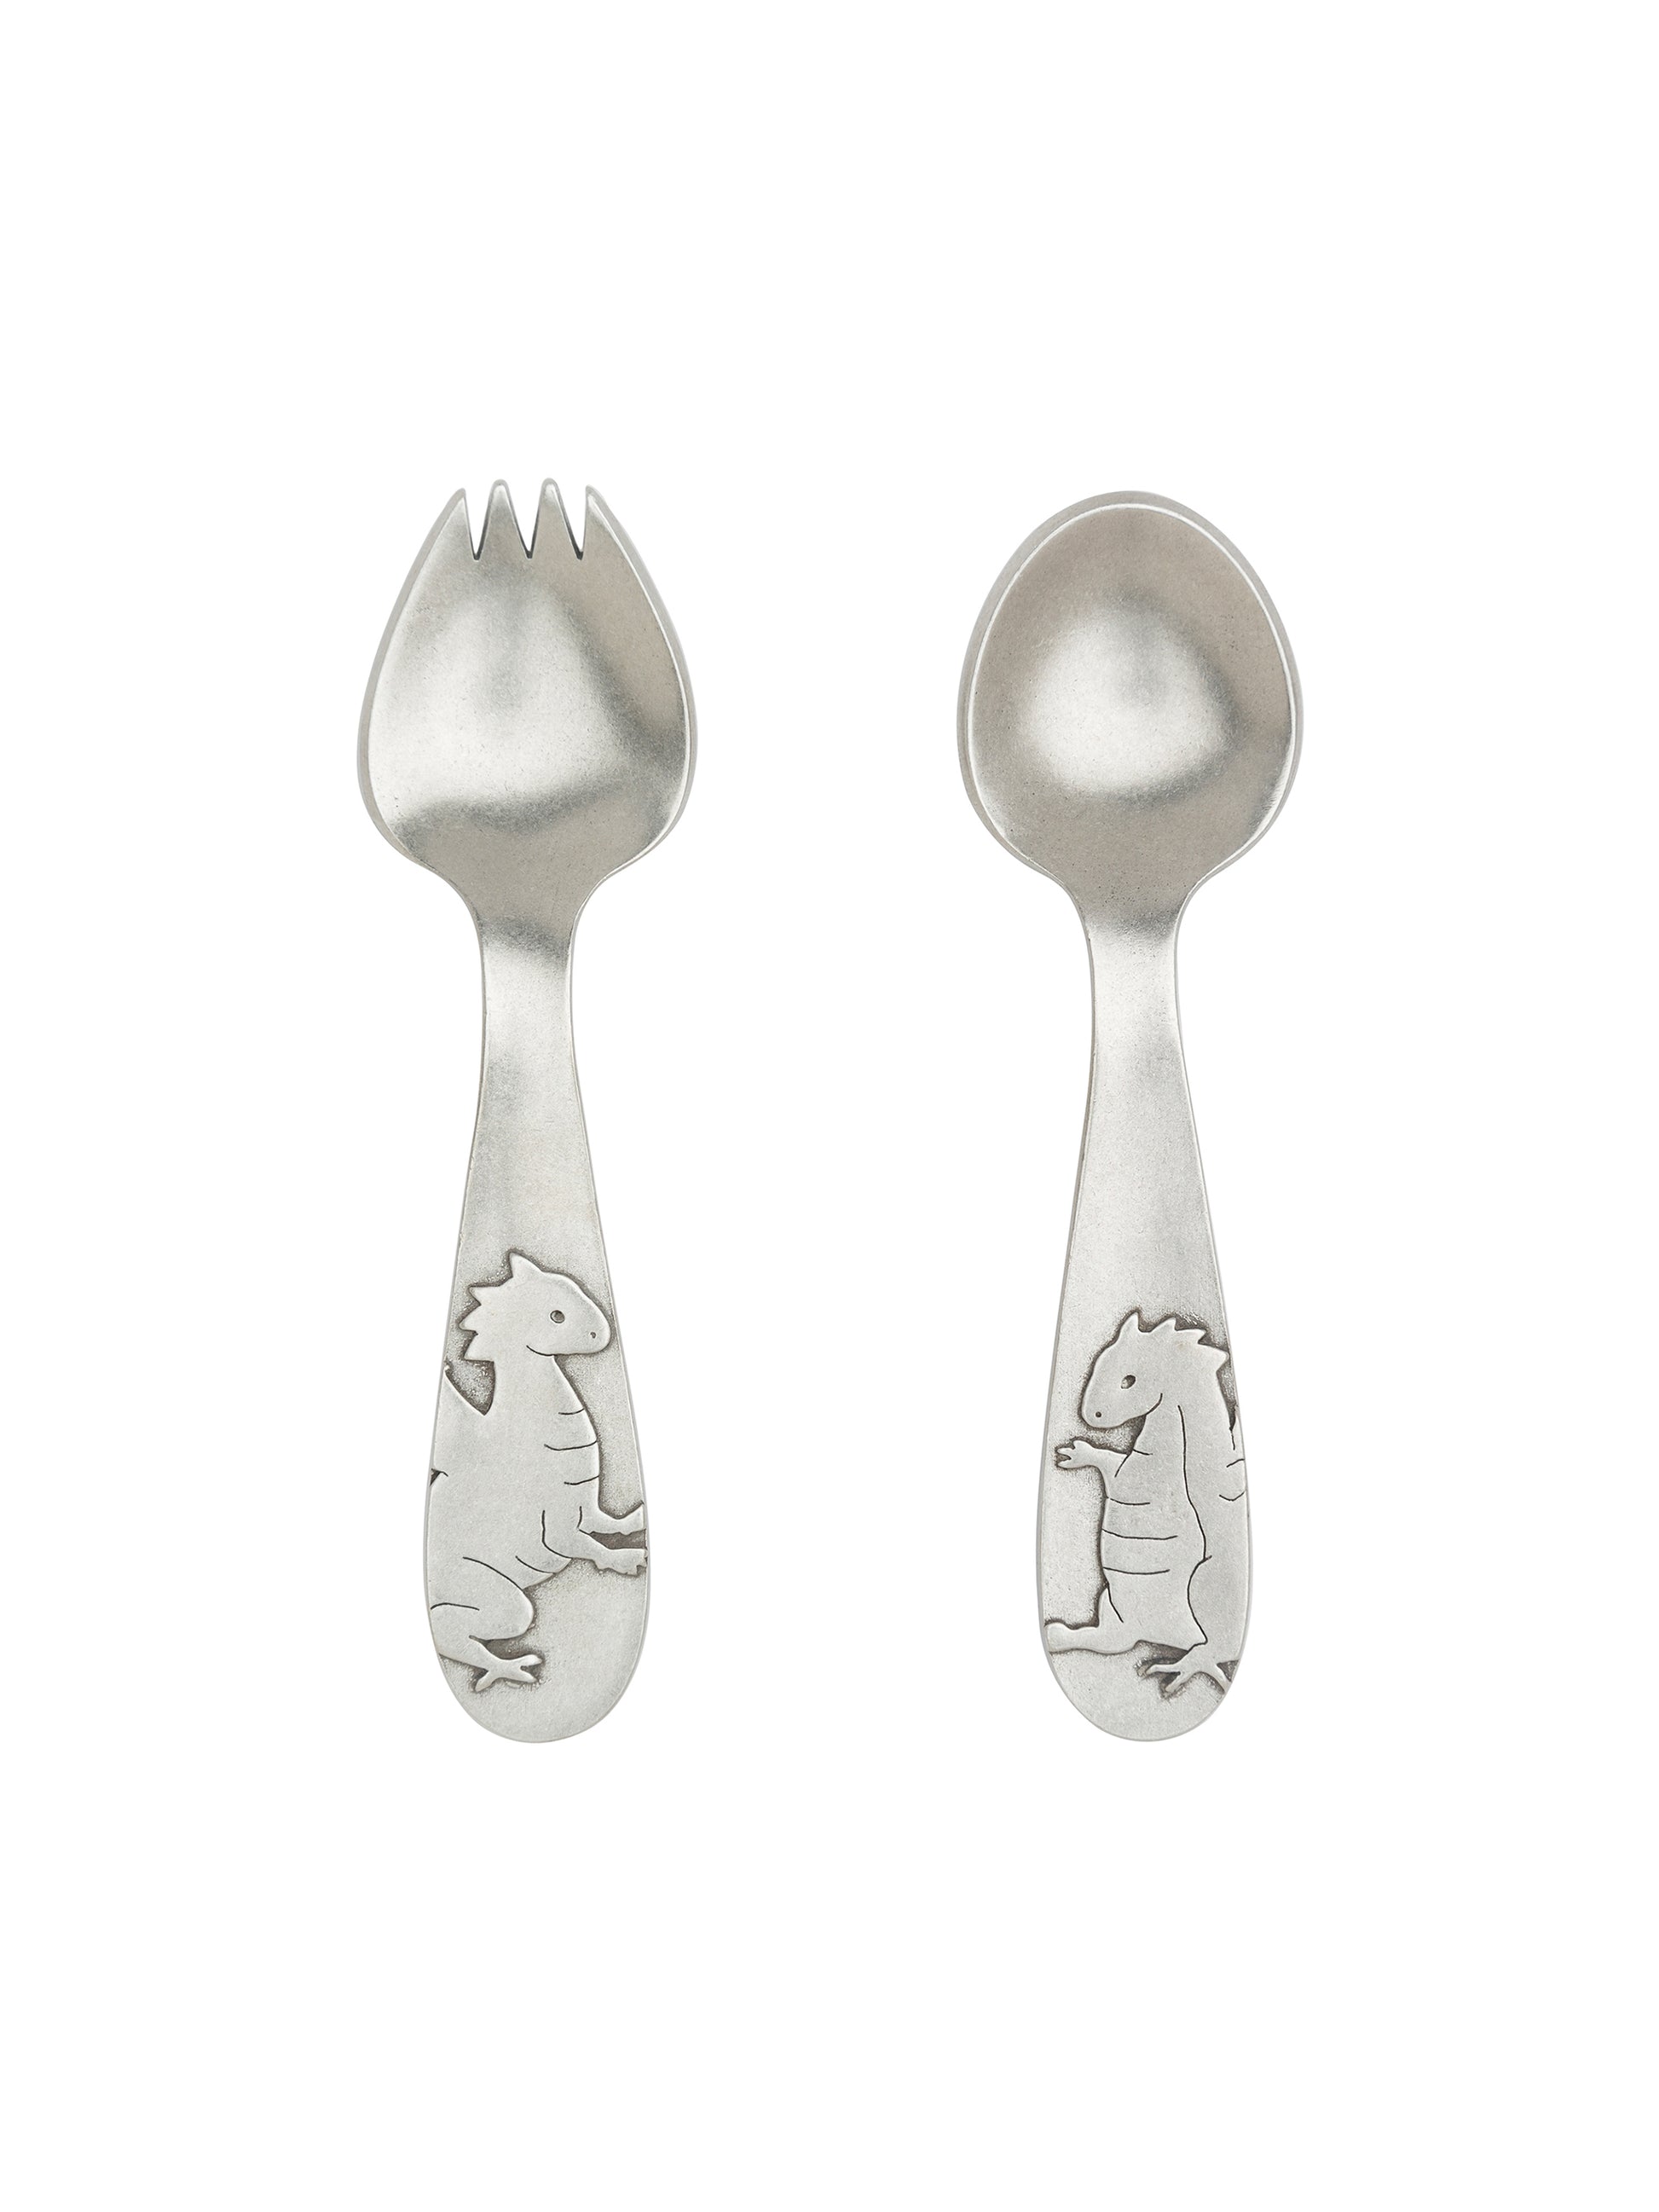 https://westontable.com/cdn/shop/products/Beehive-Handmade-Pewter-Dragon-Fork-and-Spoon-Set-Weston-Table.jpg?v=1593282699&width=1946